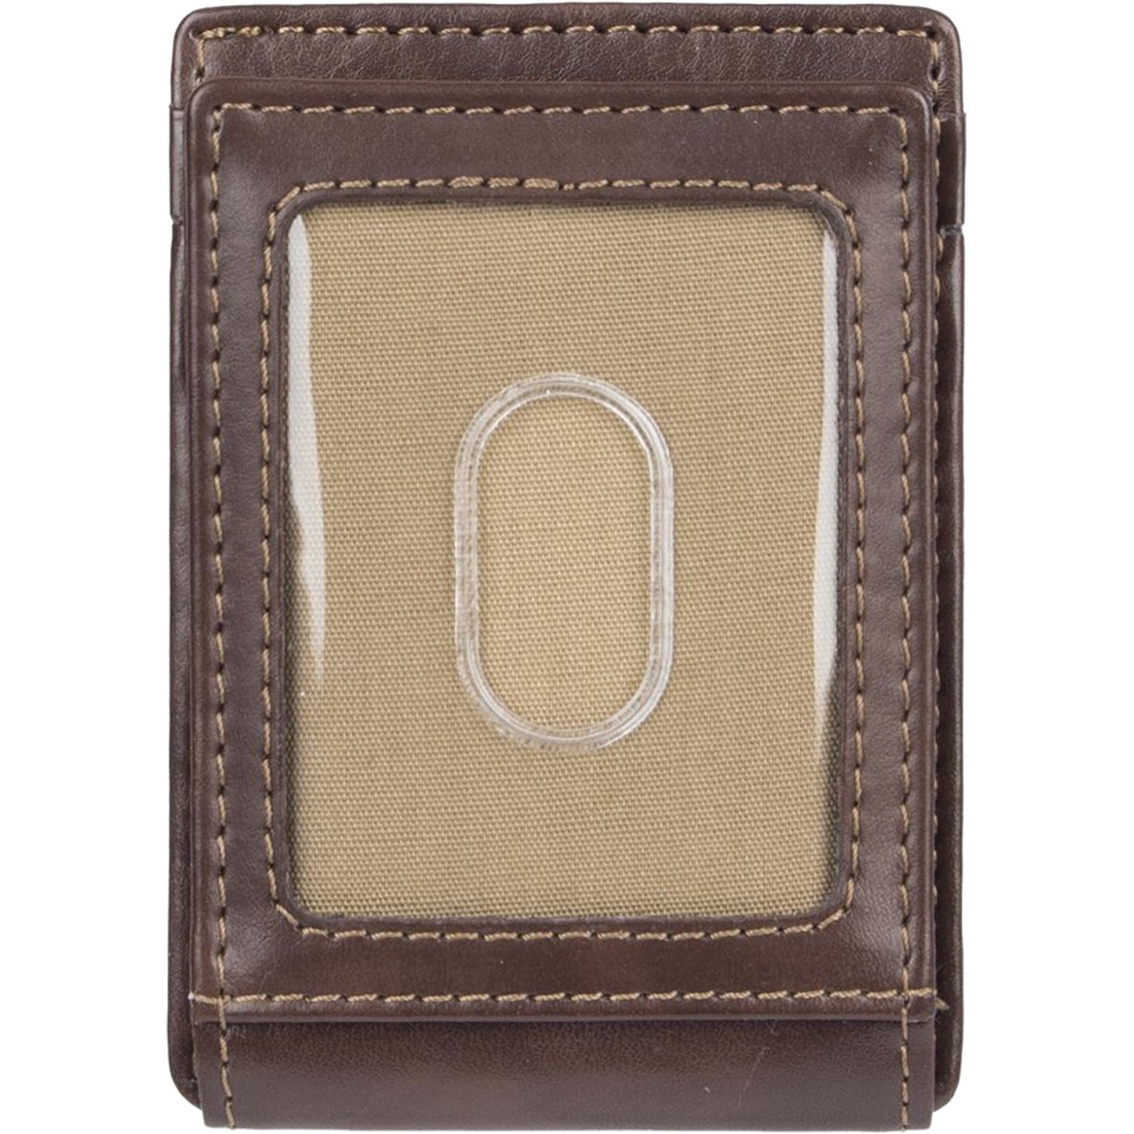 Dockers Rfid Card Case Wallet With Magnetic Front Pocket | Wallets ...